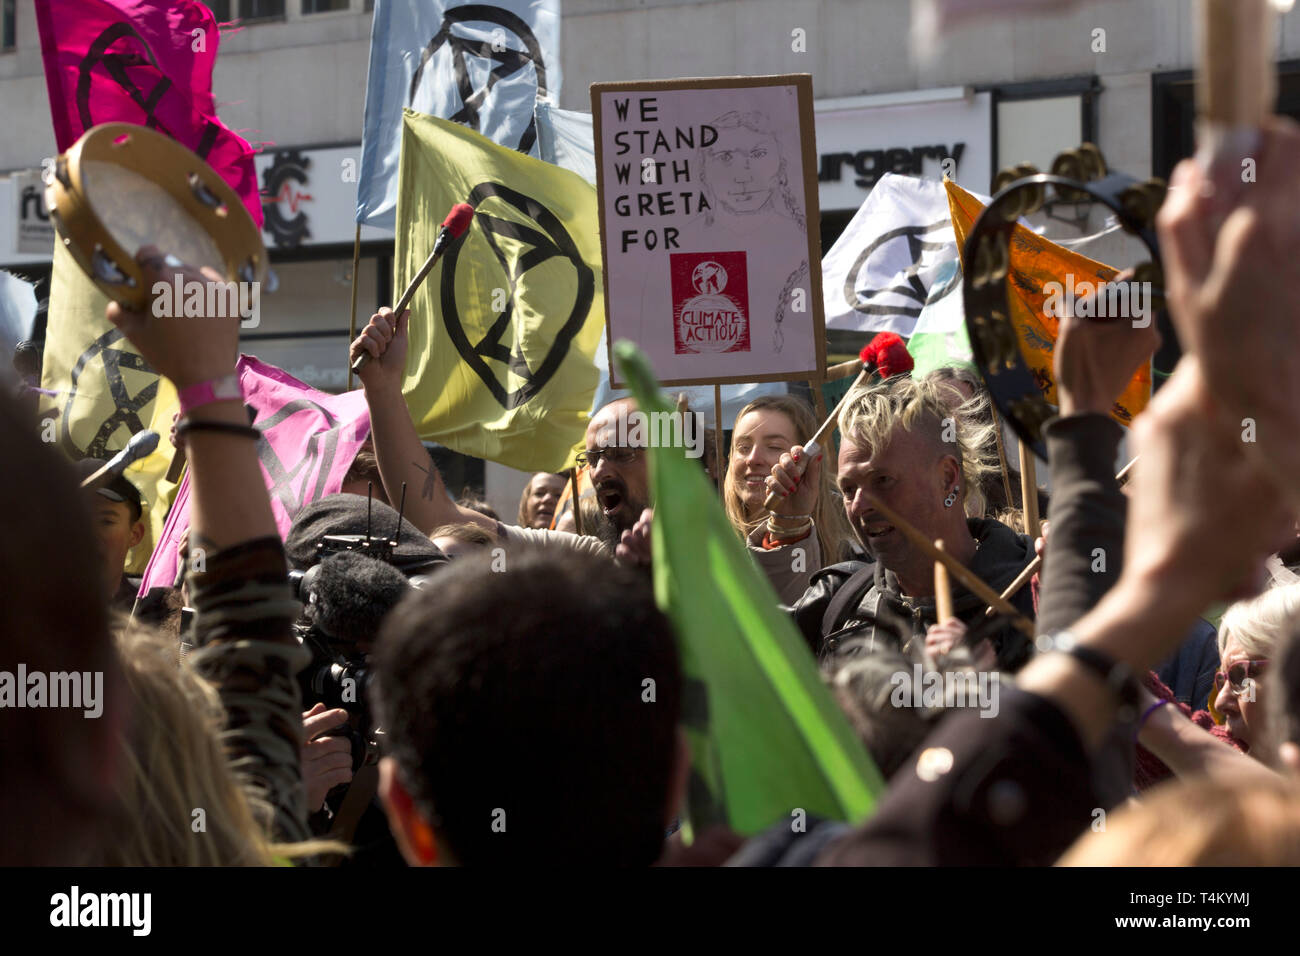 Extinction Rebellion Climate Change Protesters Stock Photo